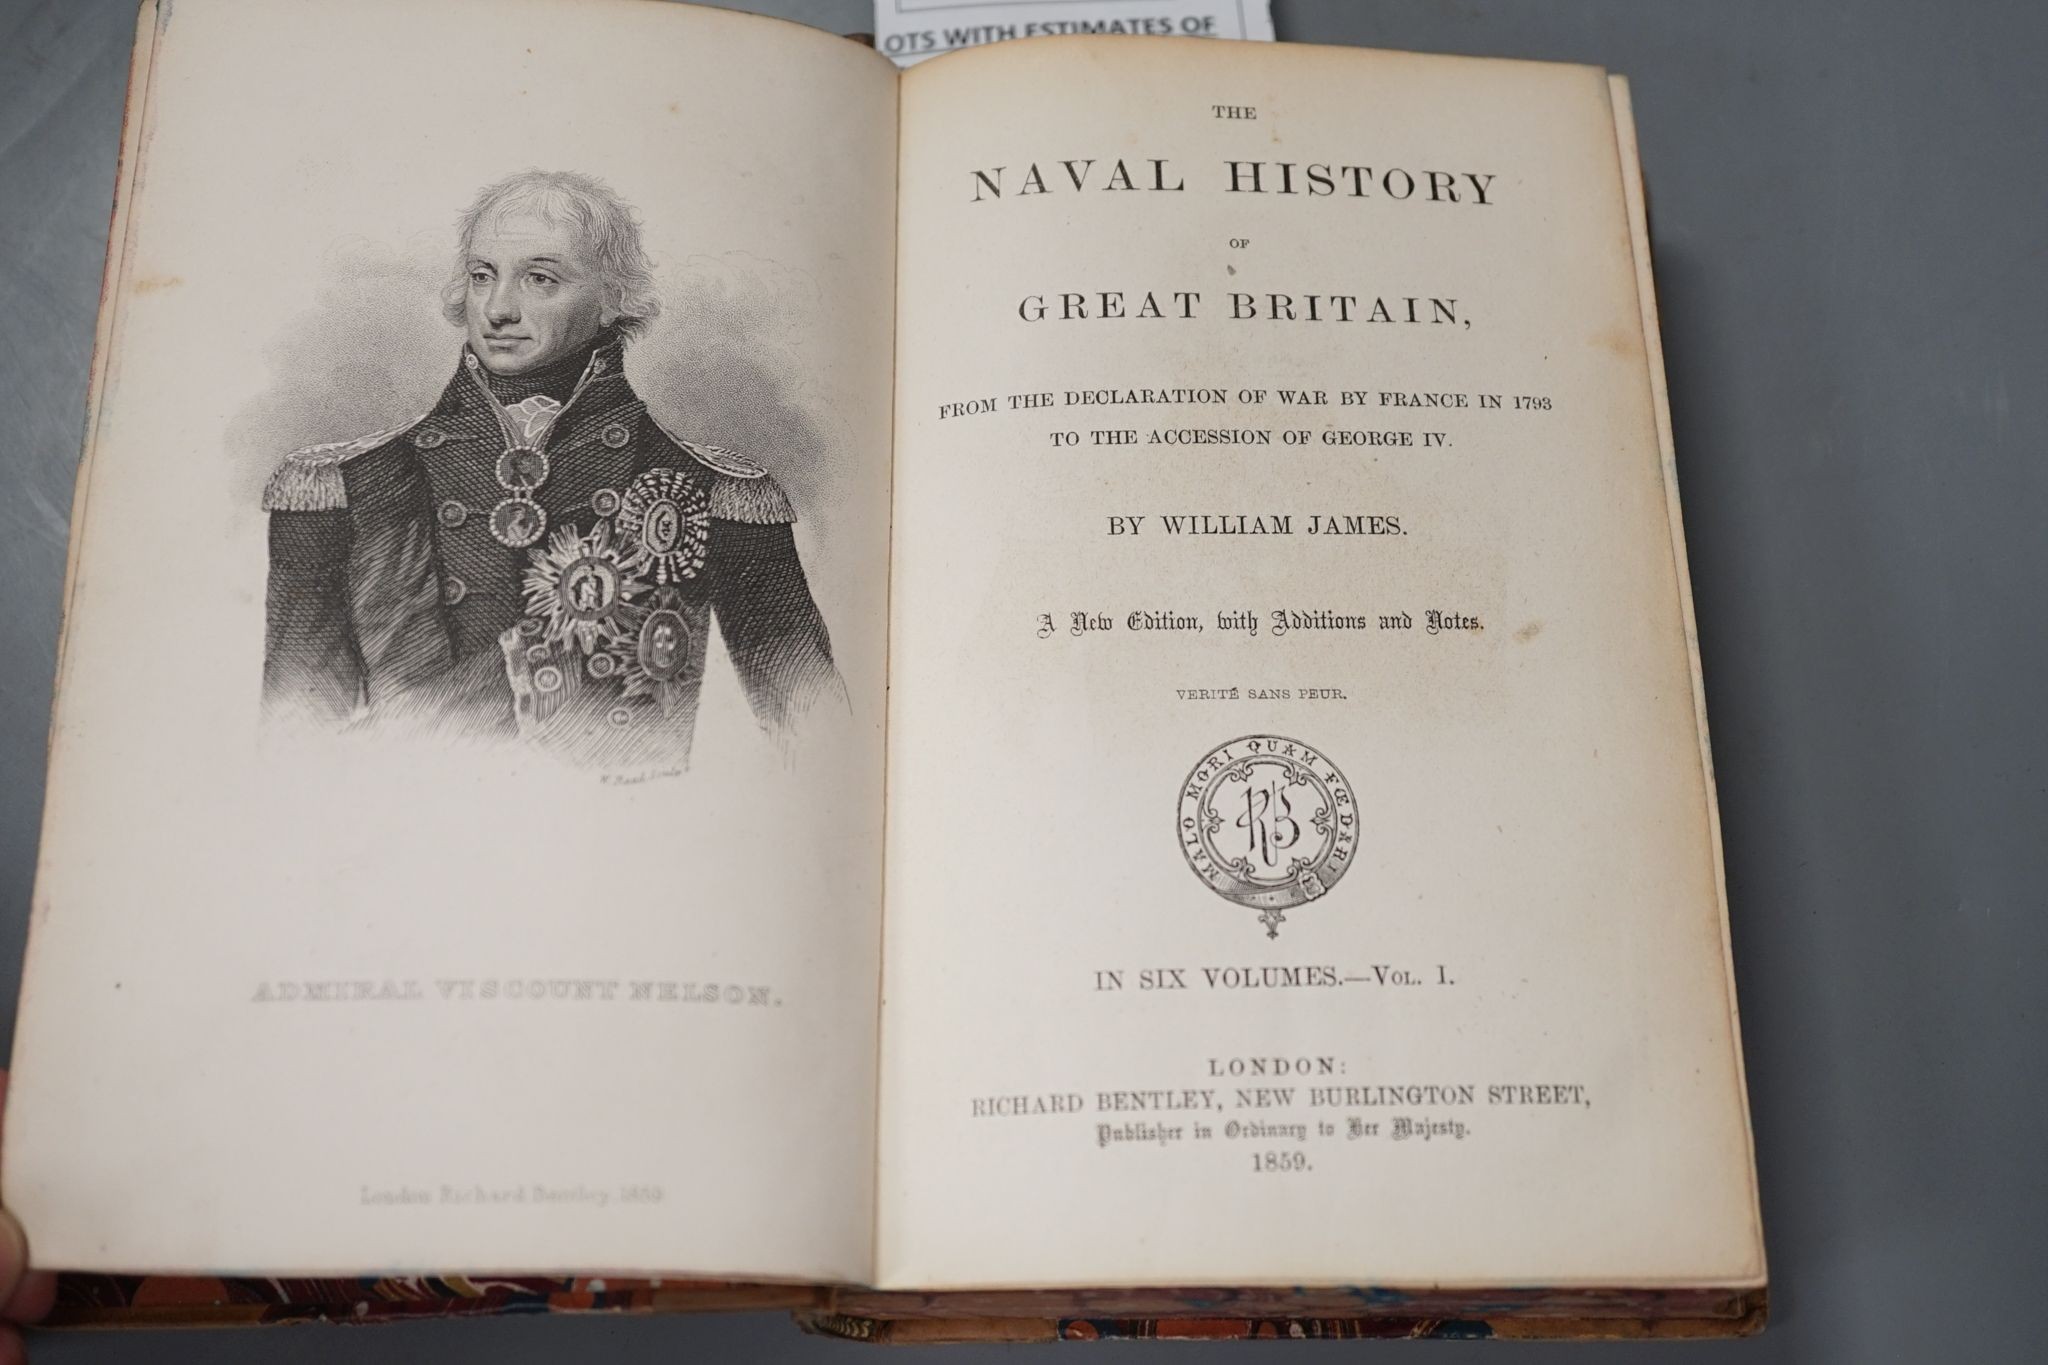 James, William - The Naval History of Great Britain ... new edition, with additions and notes, 6 vols. portrait frontispieces, 27 folded tables, text diagrams, contemp. half calf and marbled